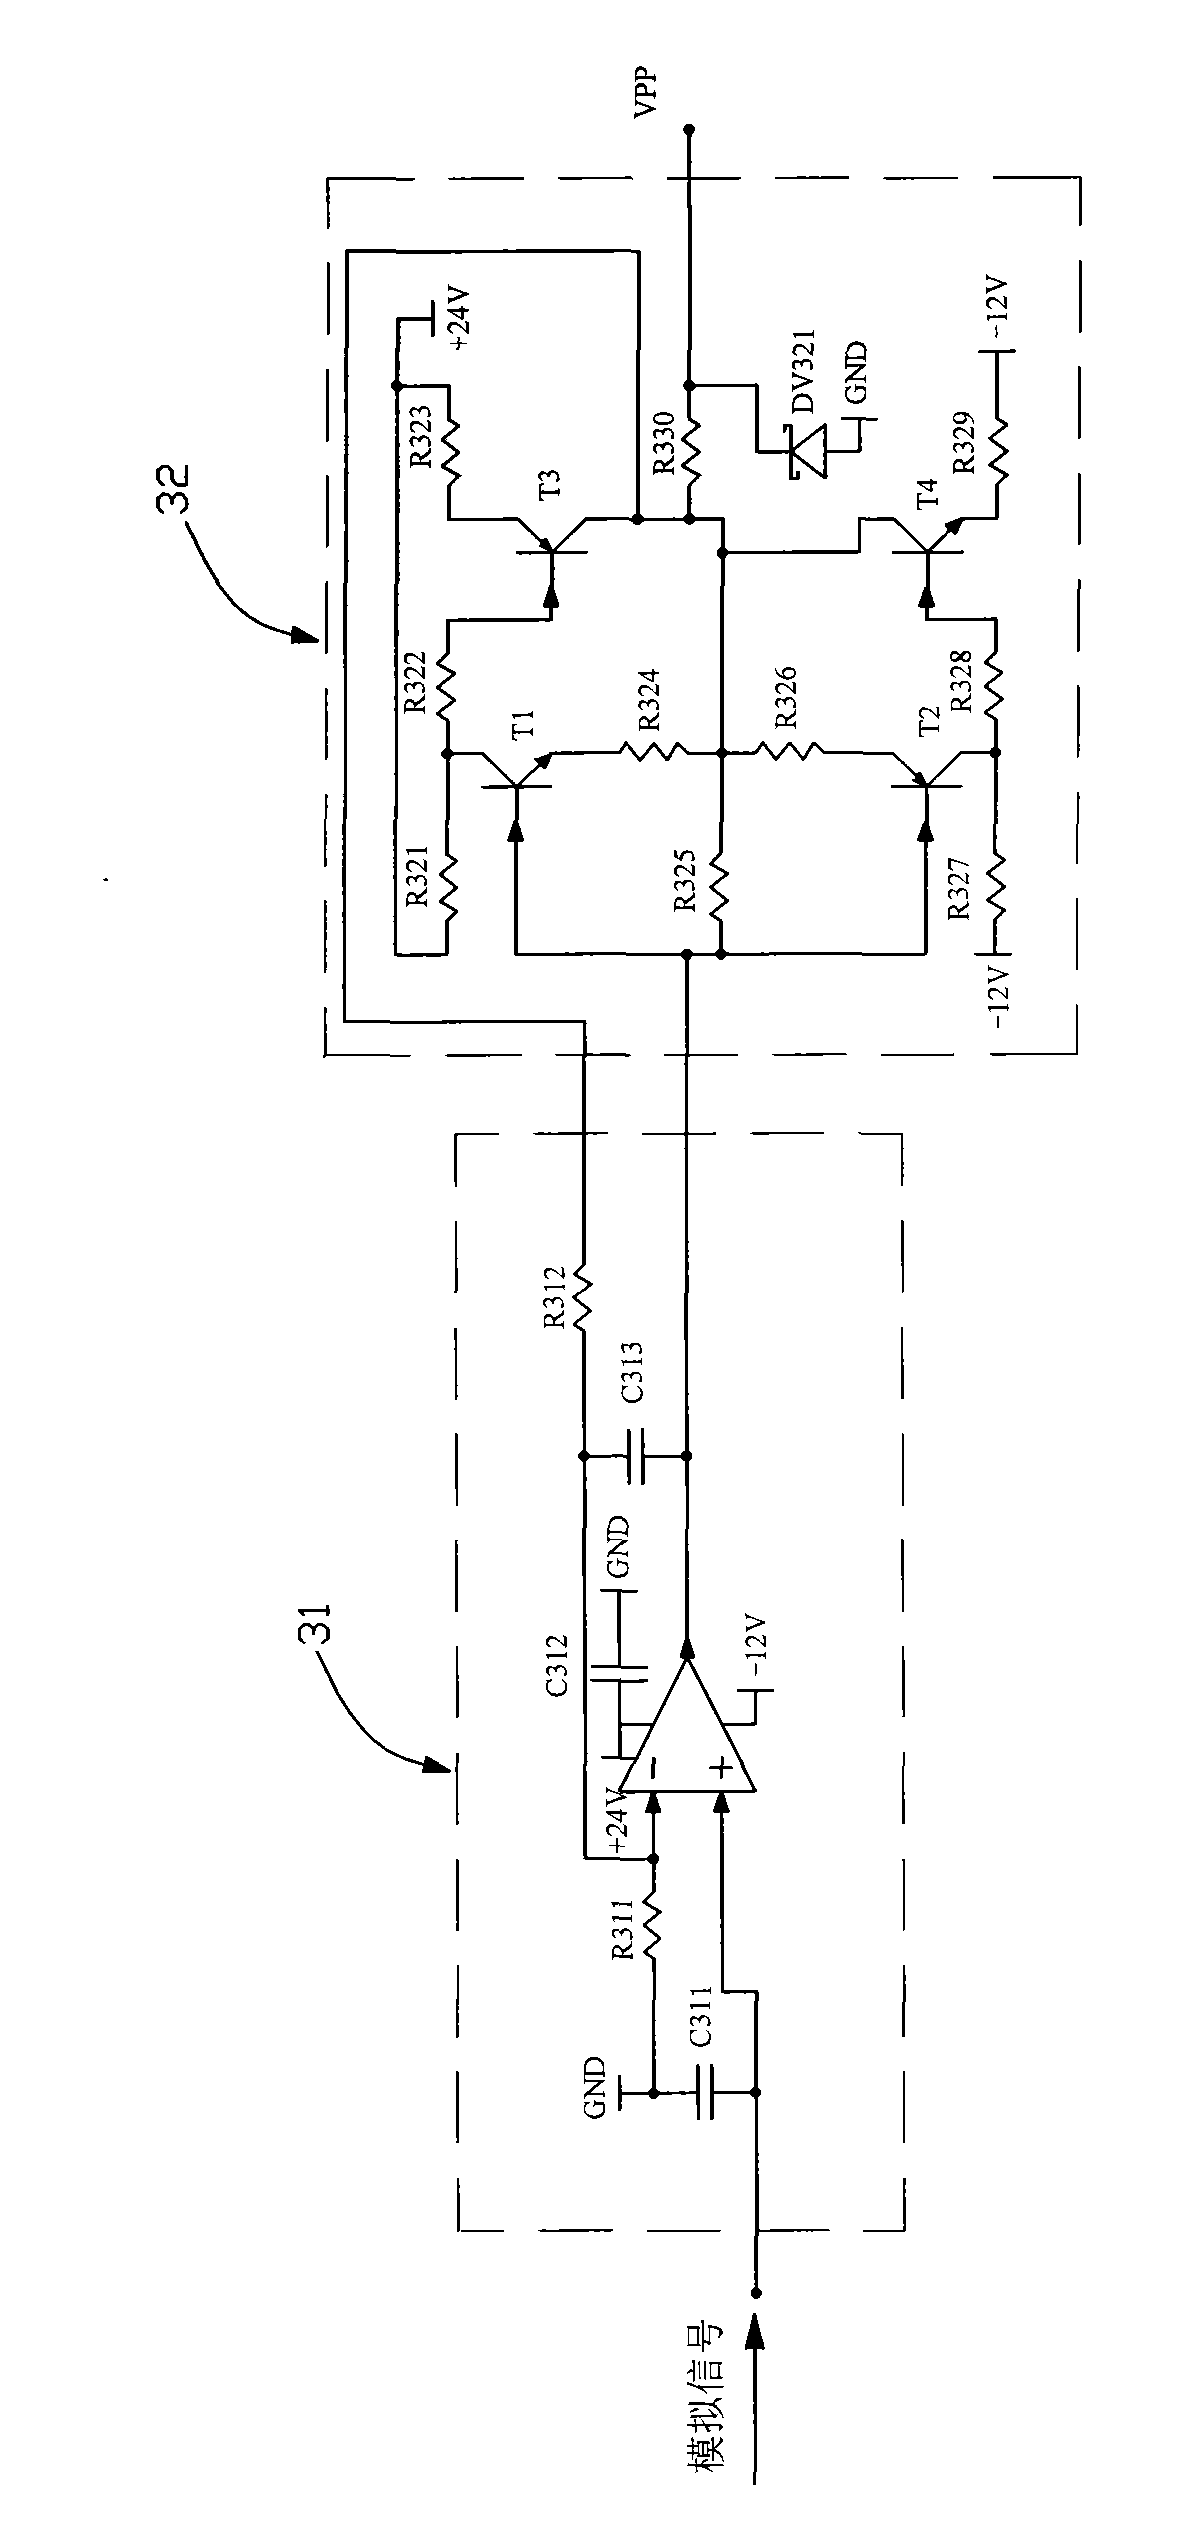 Nozzle driving circuit for inkjet printers